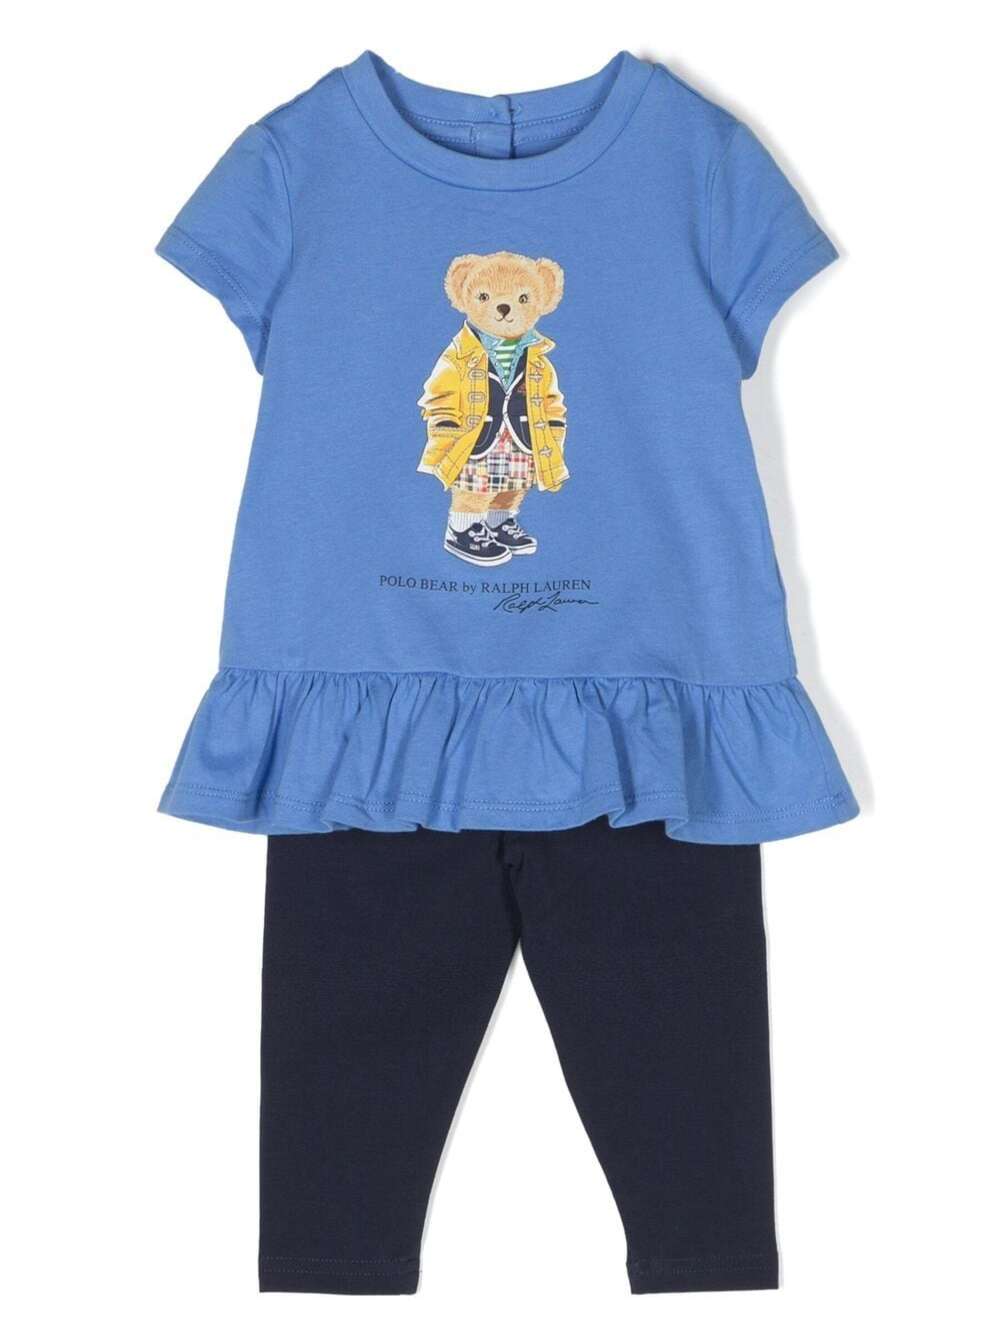 Shop Polo Ralph Lauren Blue And Black Set With Top And Leggings With Teddy Bear Print In Cotton Baby